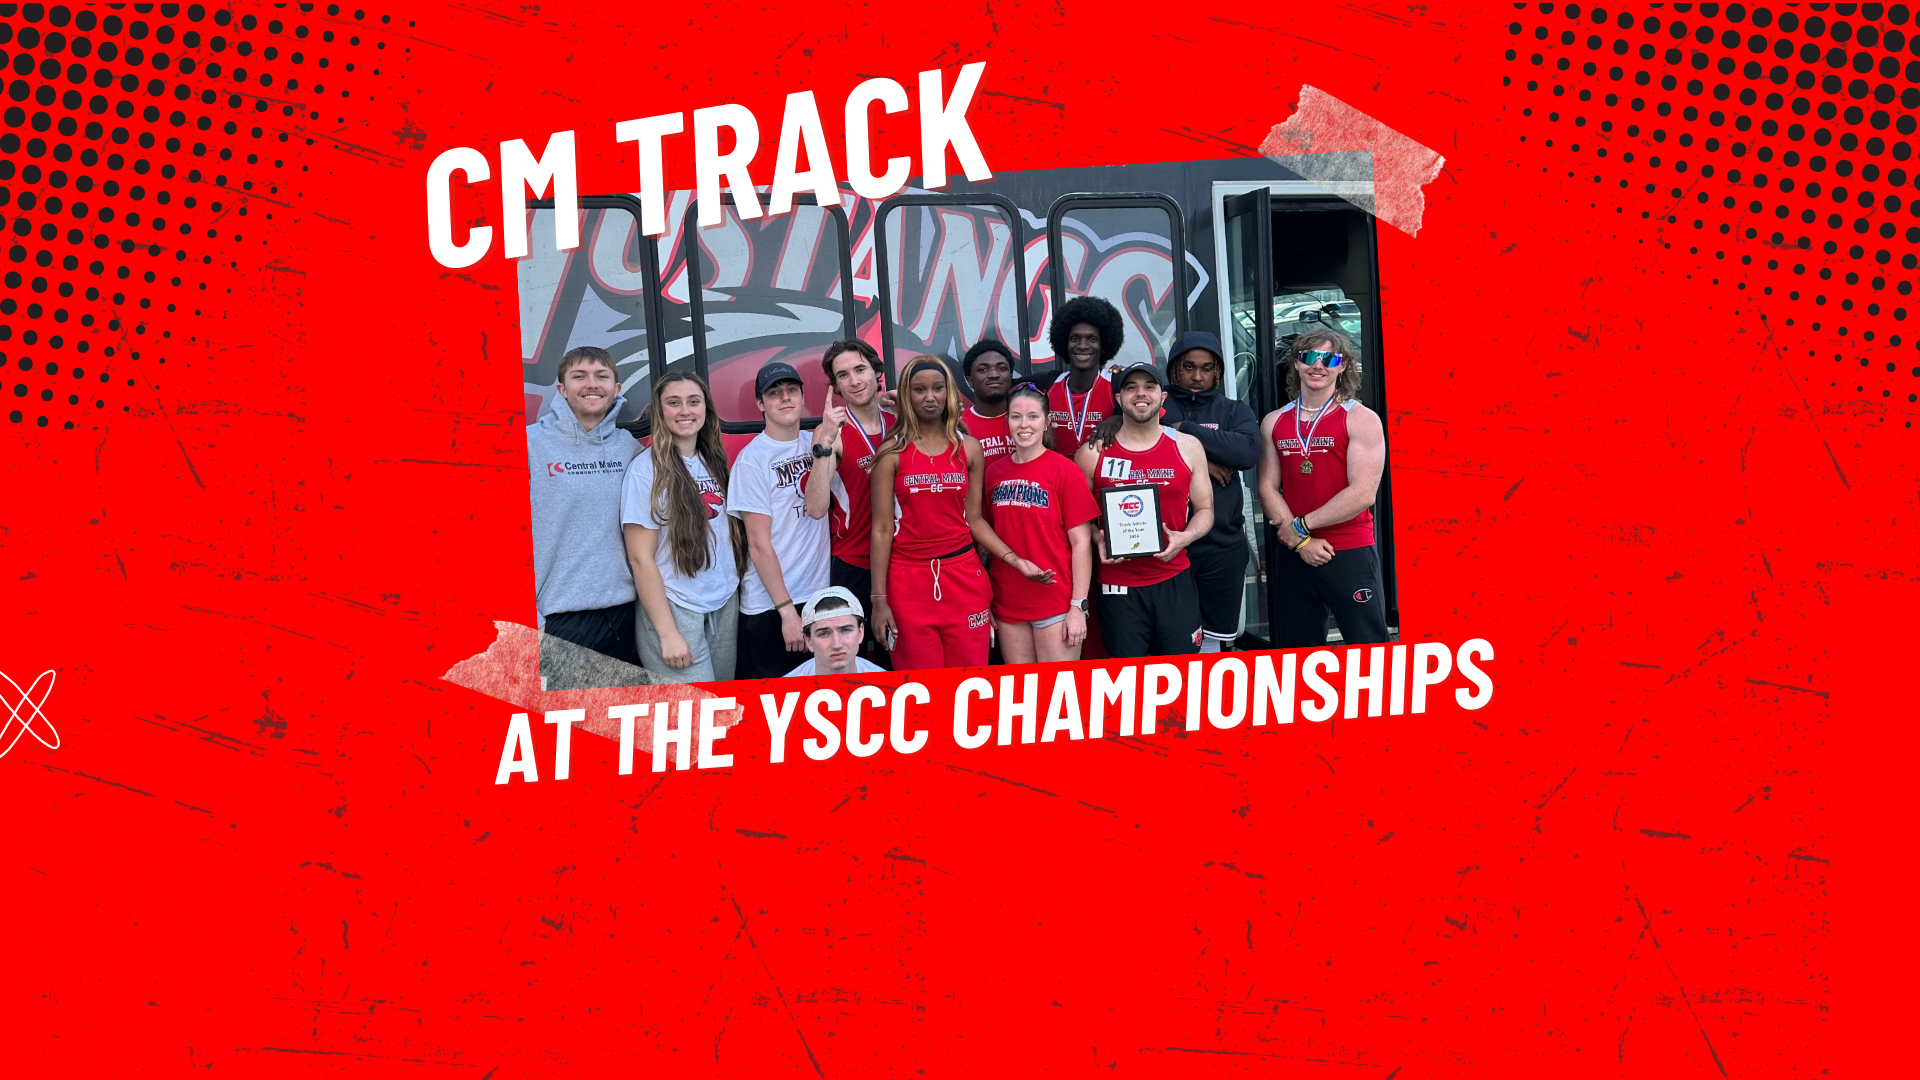 Mustangs place 3rd at YSCC Championships